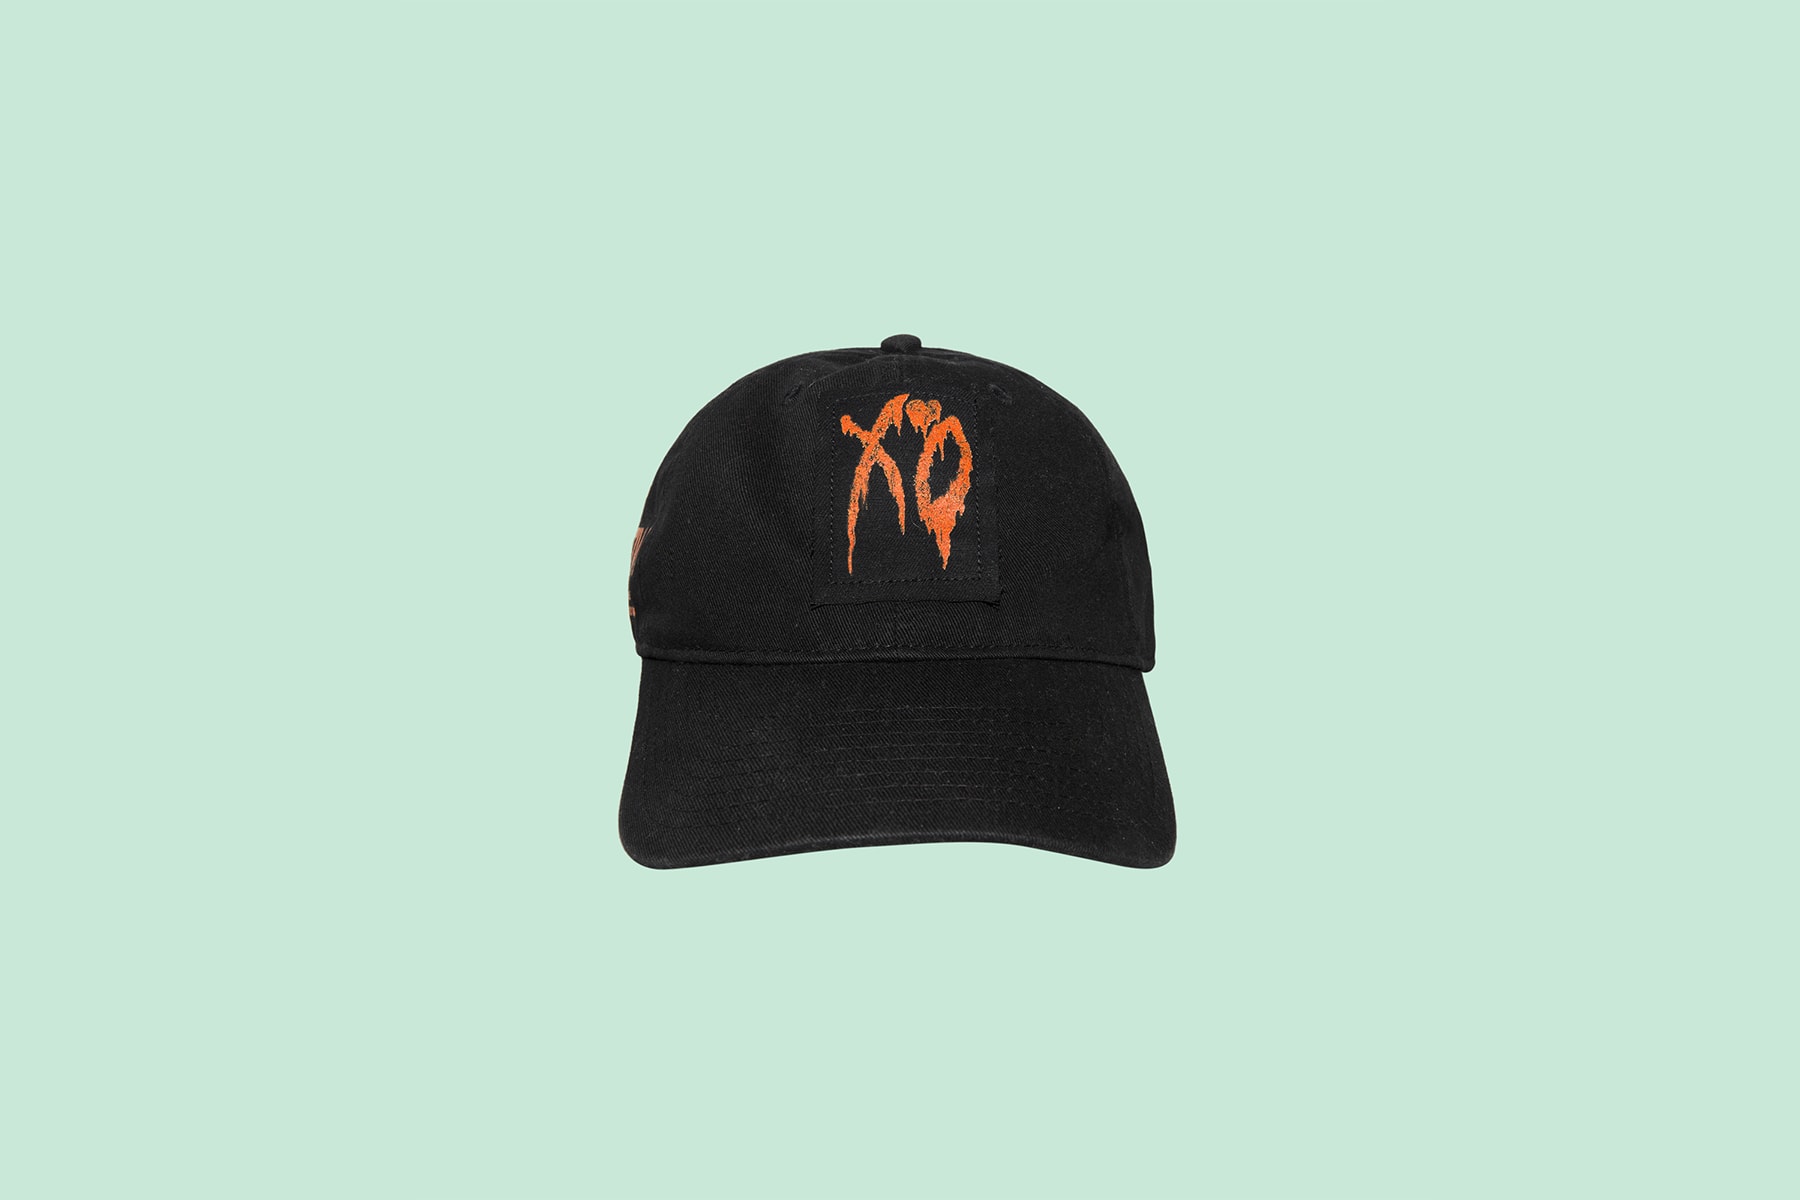 the weeknd nyc panorama festival collection limited edition 48 hours exclusive xo